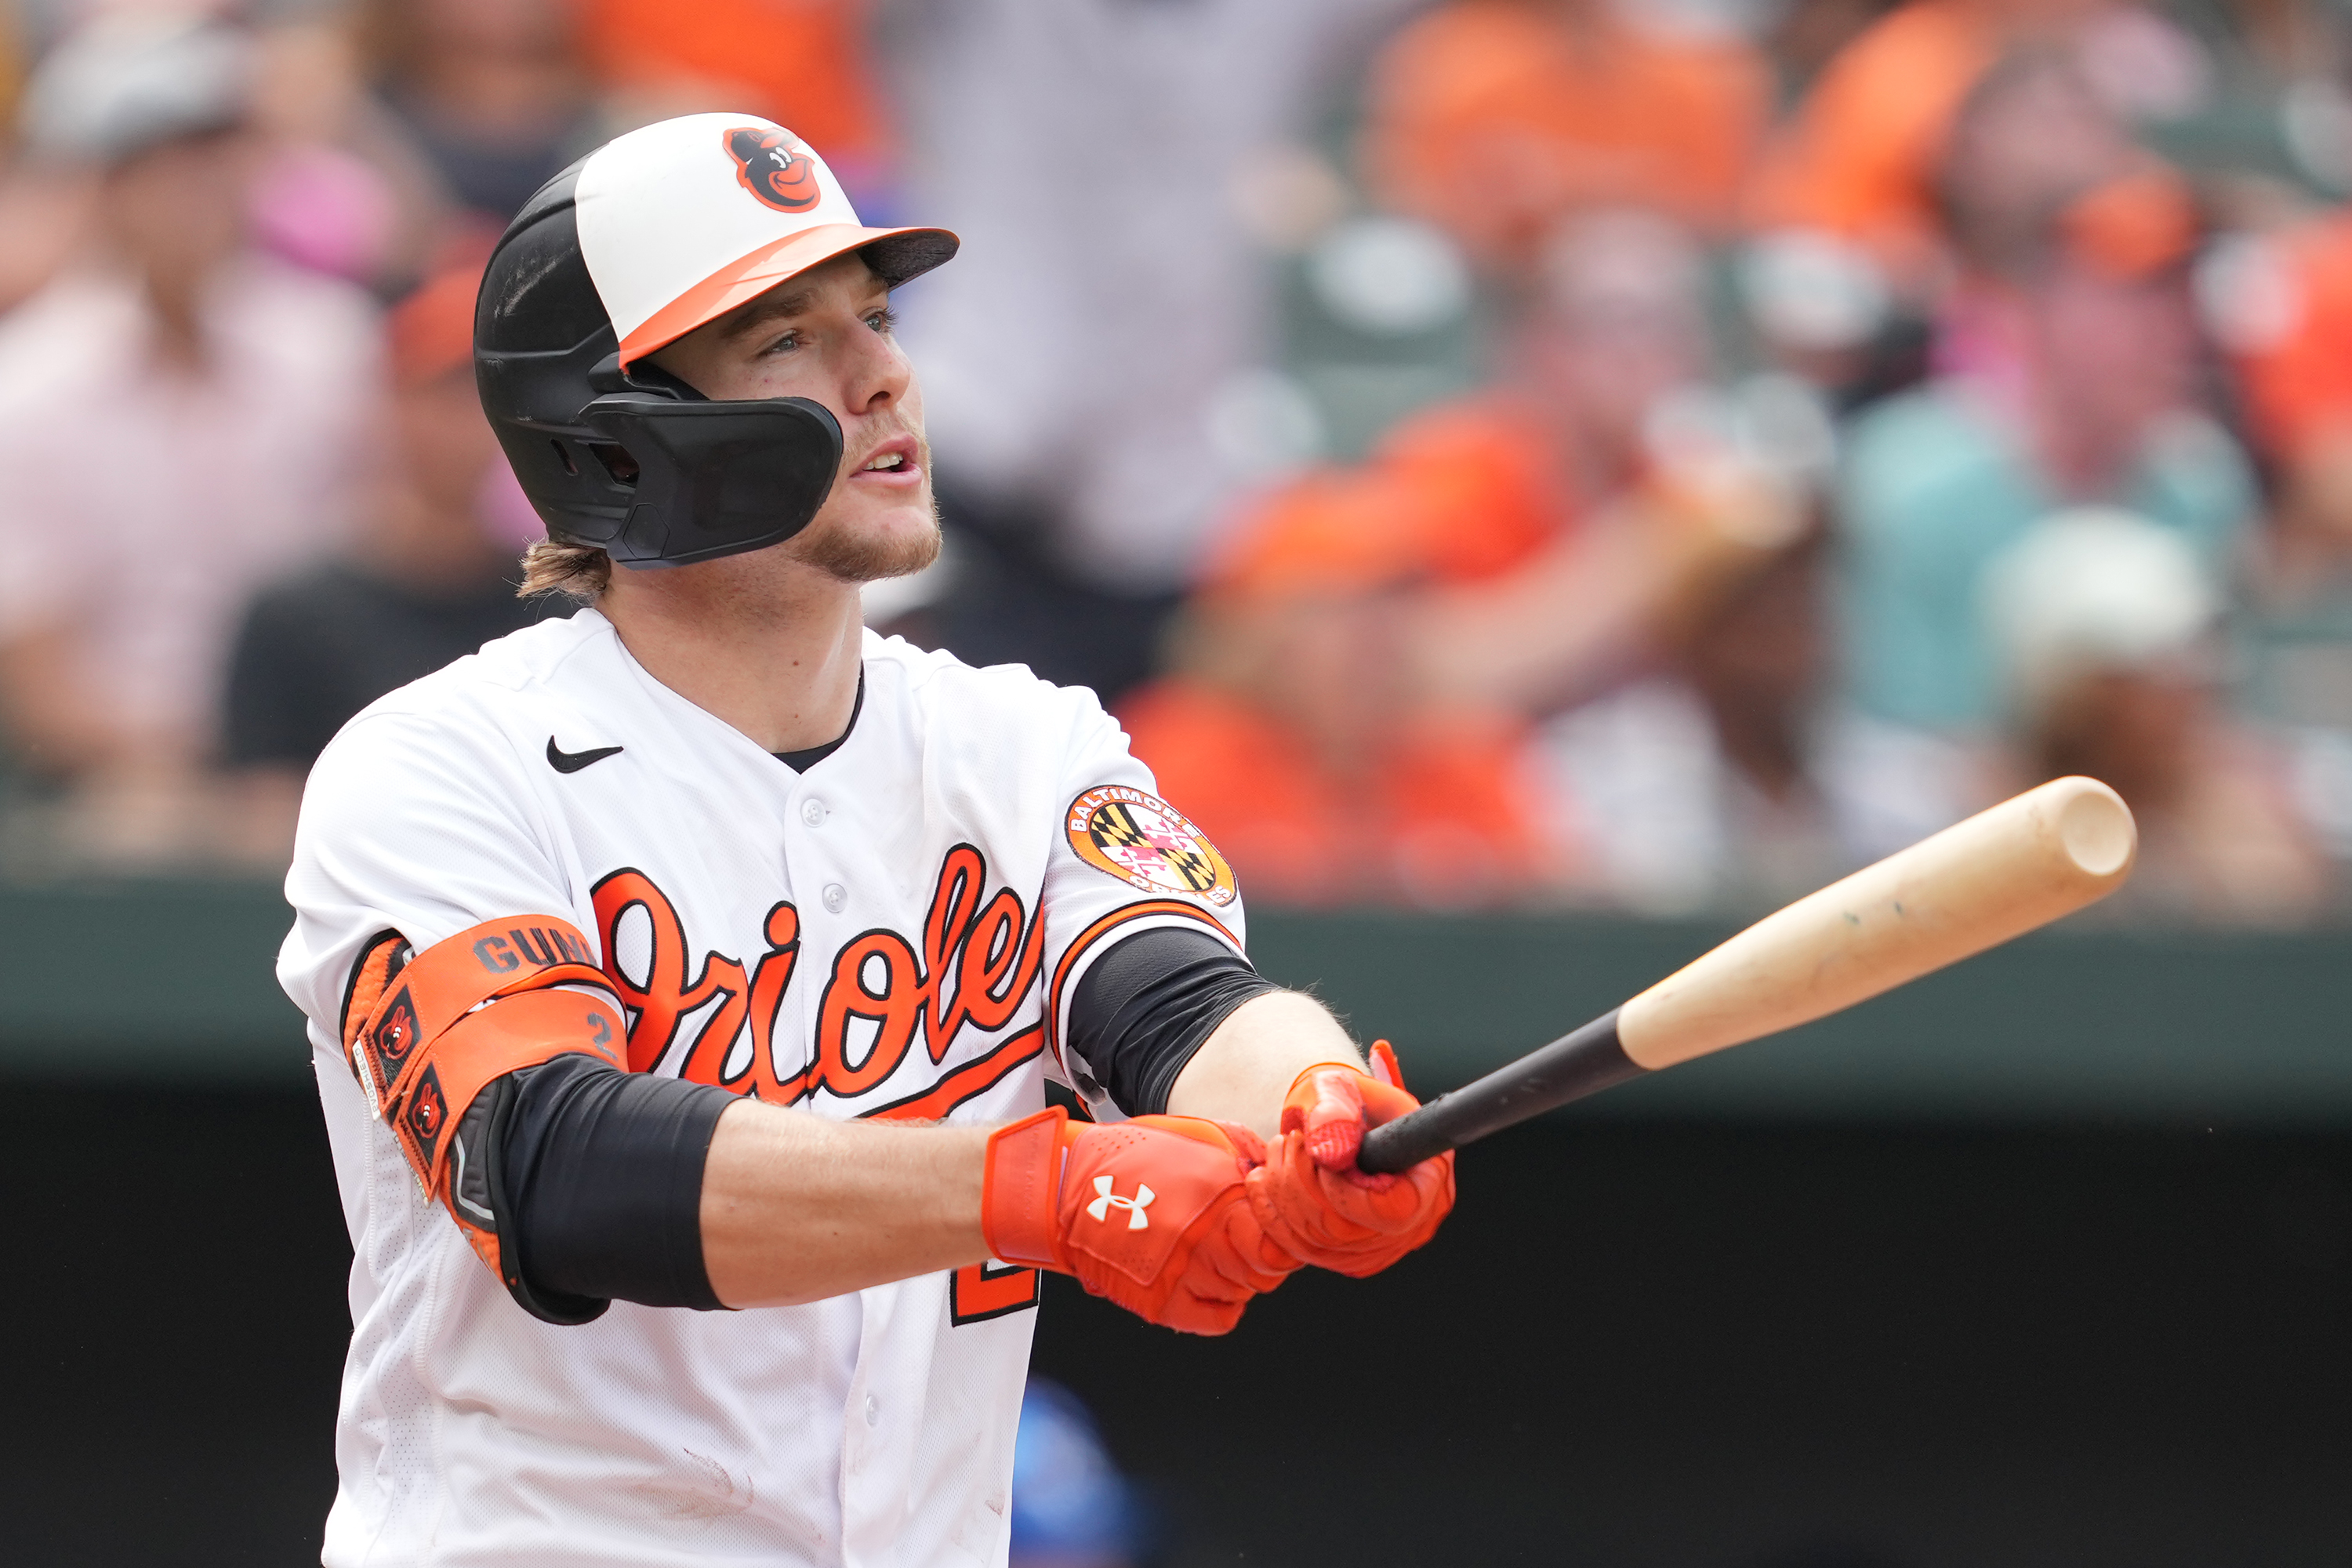 Oriole Park at Camden Yards: A Watershed Moment for Sports